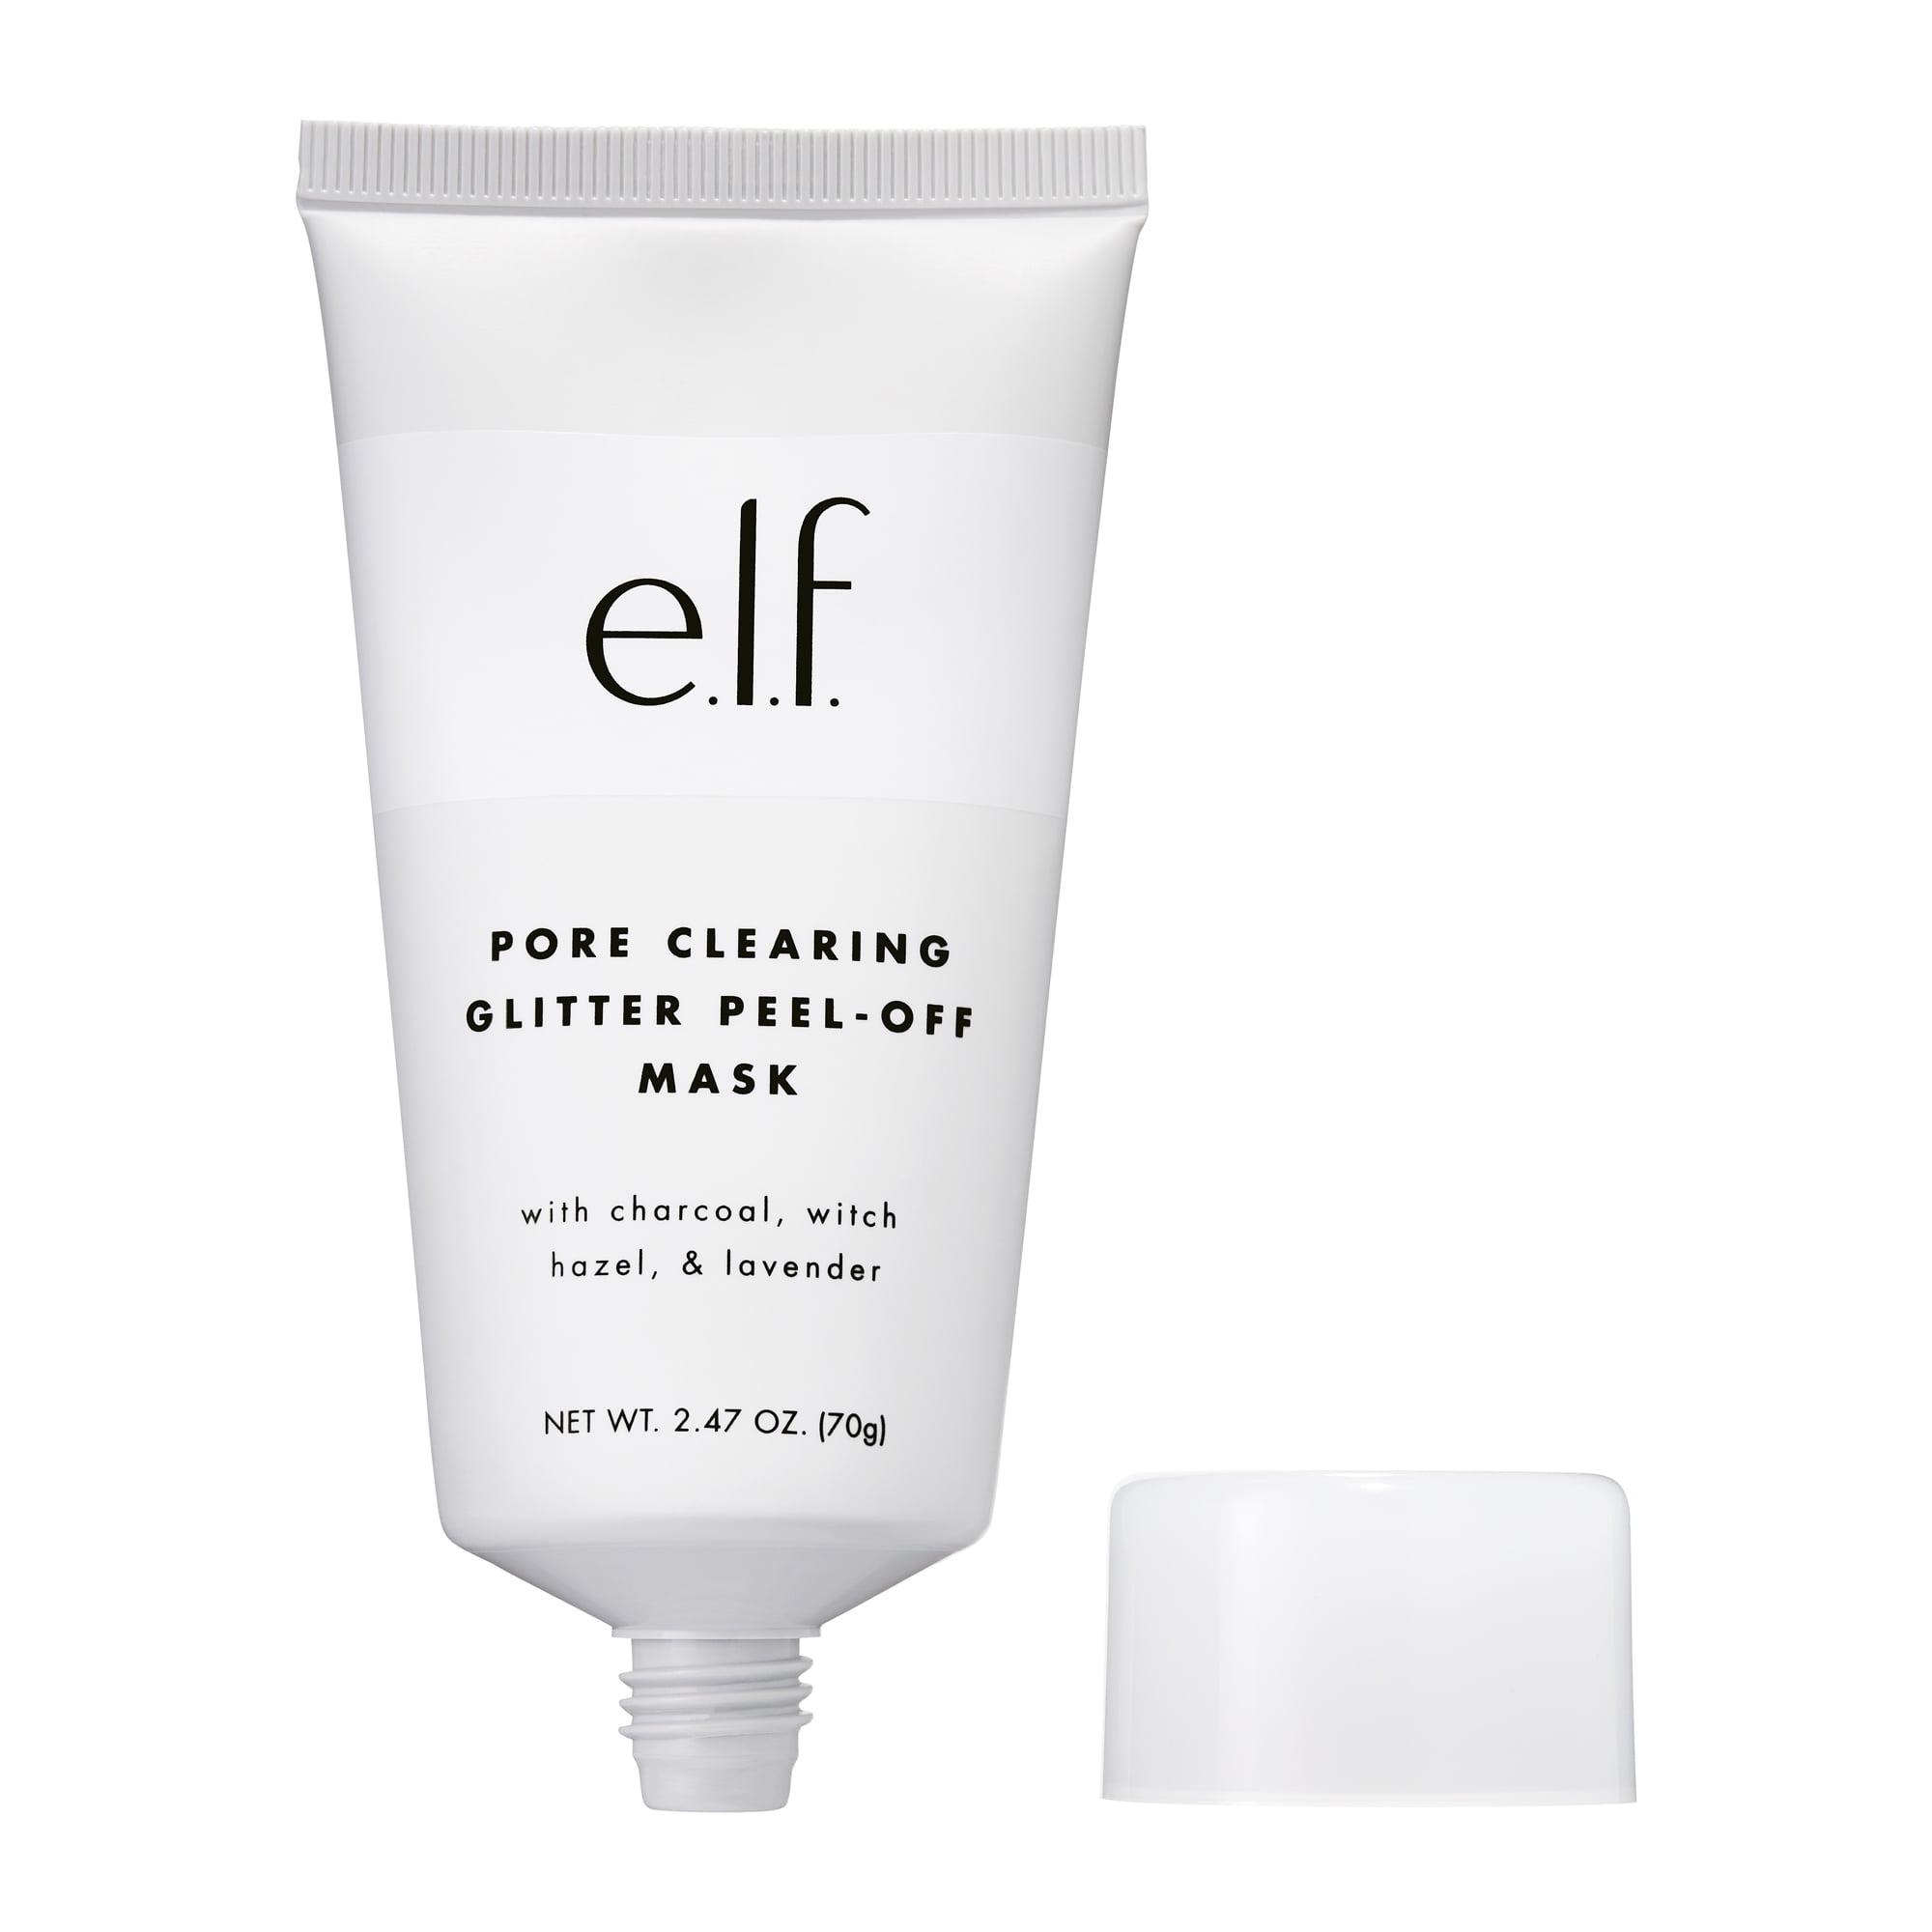 Pore clearing Peel off Mask. Pure Skin Pore clearing Peel off Mask. Daily Care face Mask Peel-off Sparkly Golden. Diamond glitter Peel off Mask. Pore clear